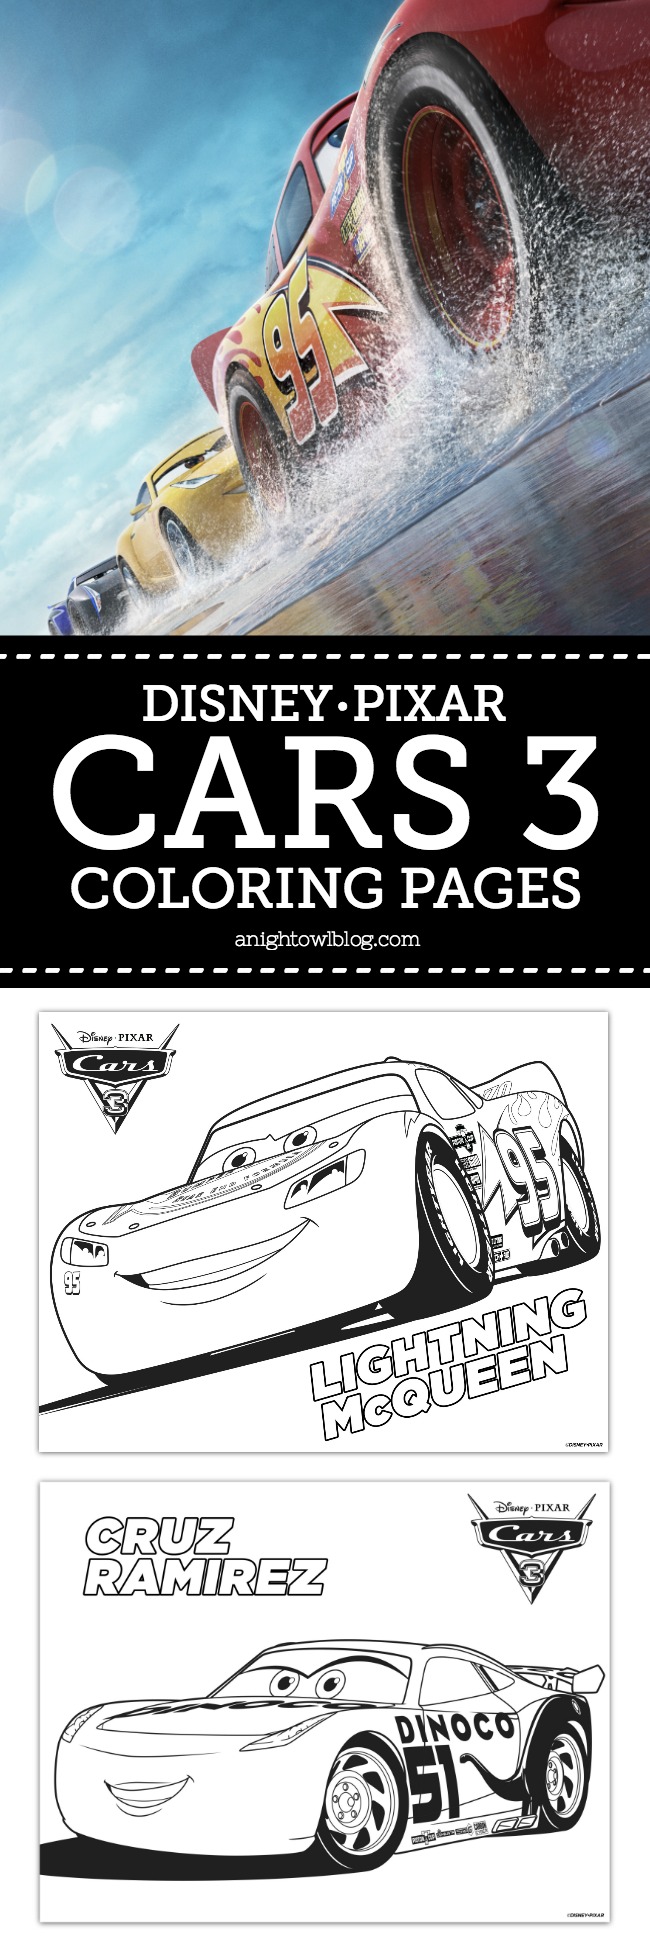 Hot off the presses! If your kids are excited about NEW Disney Pixar's Cars 3, download these FREE Disney Pixar Cars 3 Coloring Pages today! 